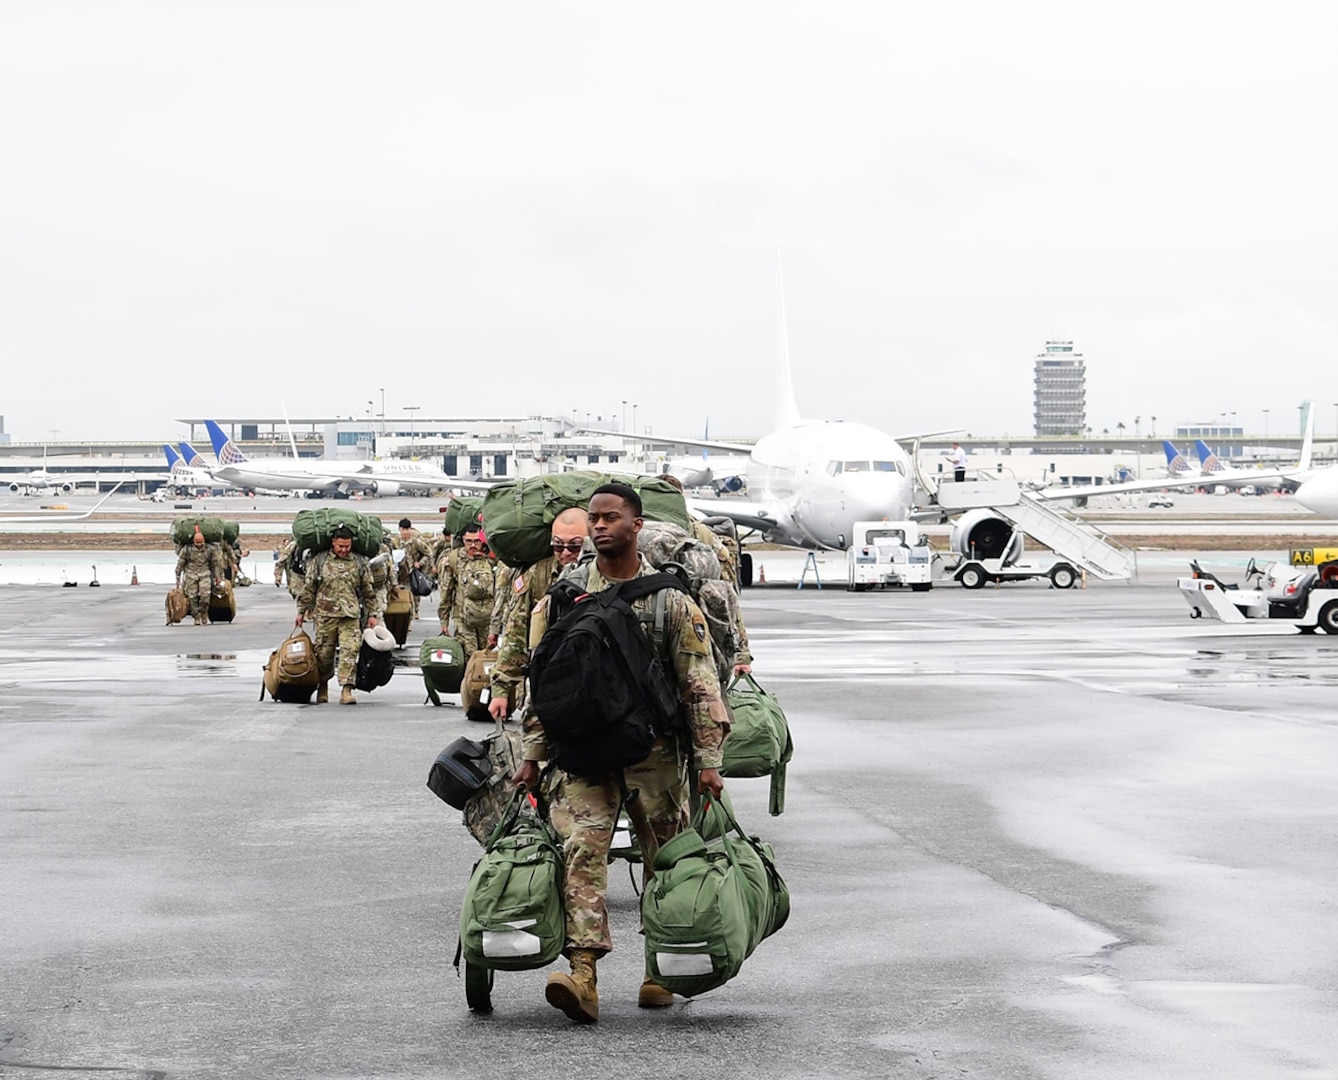 Soldiers from the California National Guard’s San Bernardino-based 1-185th Infantry Regiment arrive at Los Angeles International Airport Oct. 15, 2022, after a one-year deployment to Poland to support the NATO alliance.